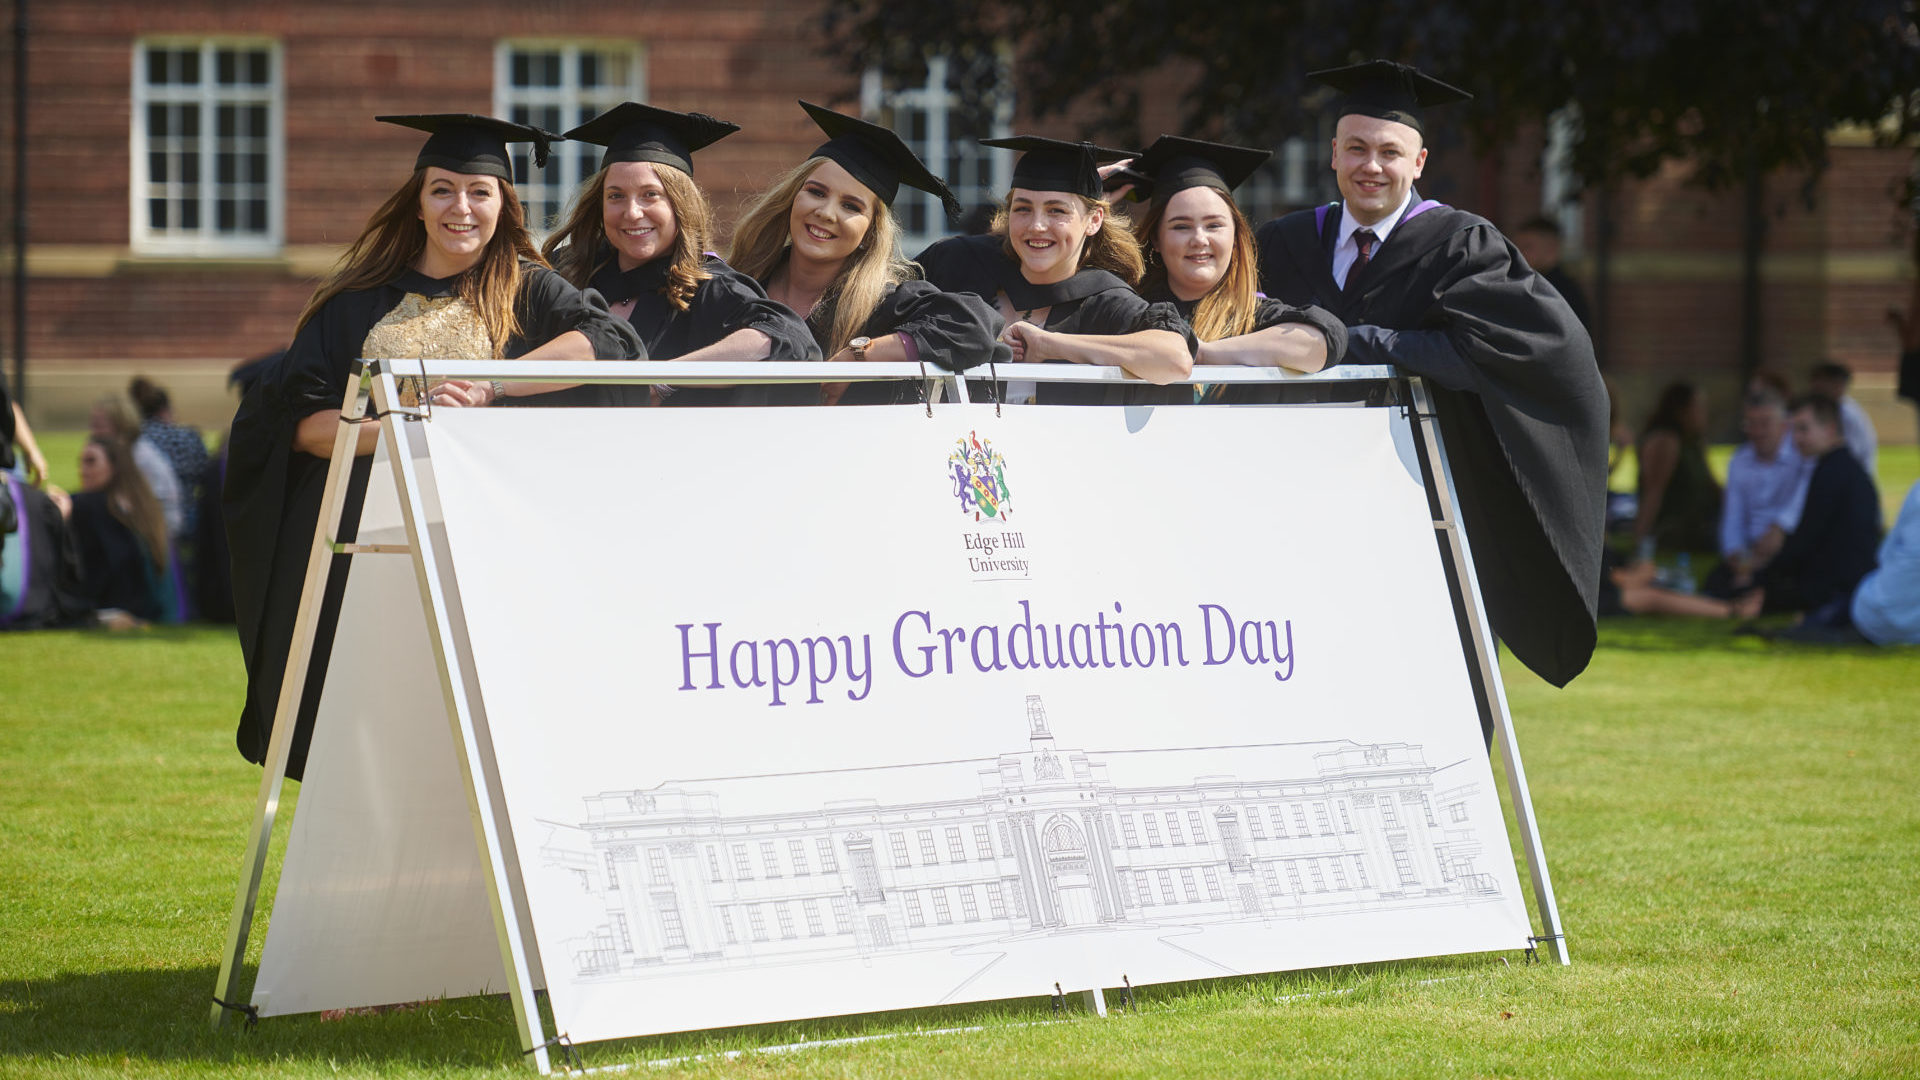 Graduates in front of Happy Graduation Day sign